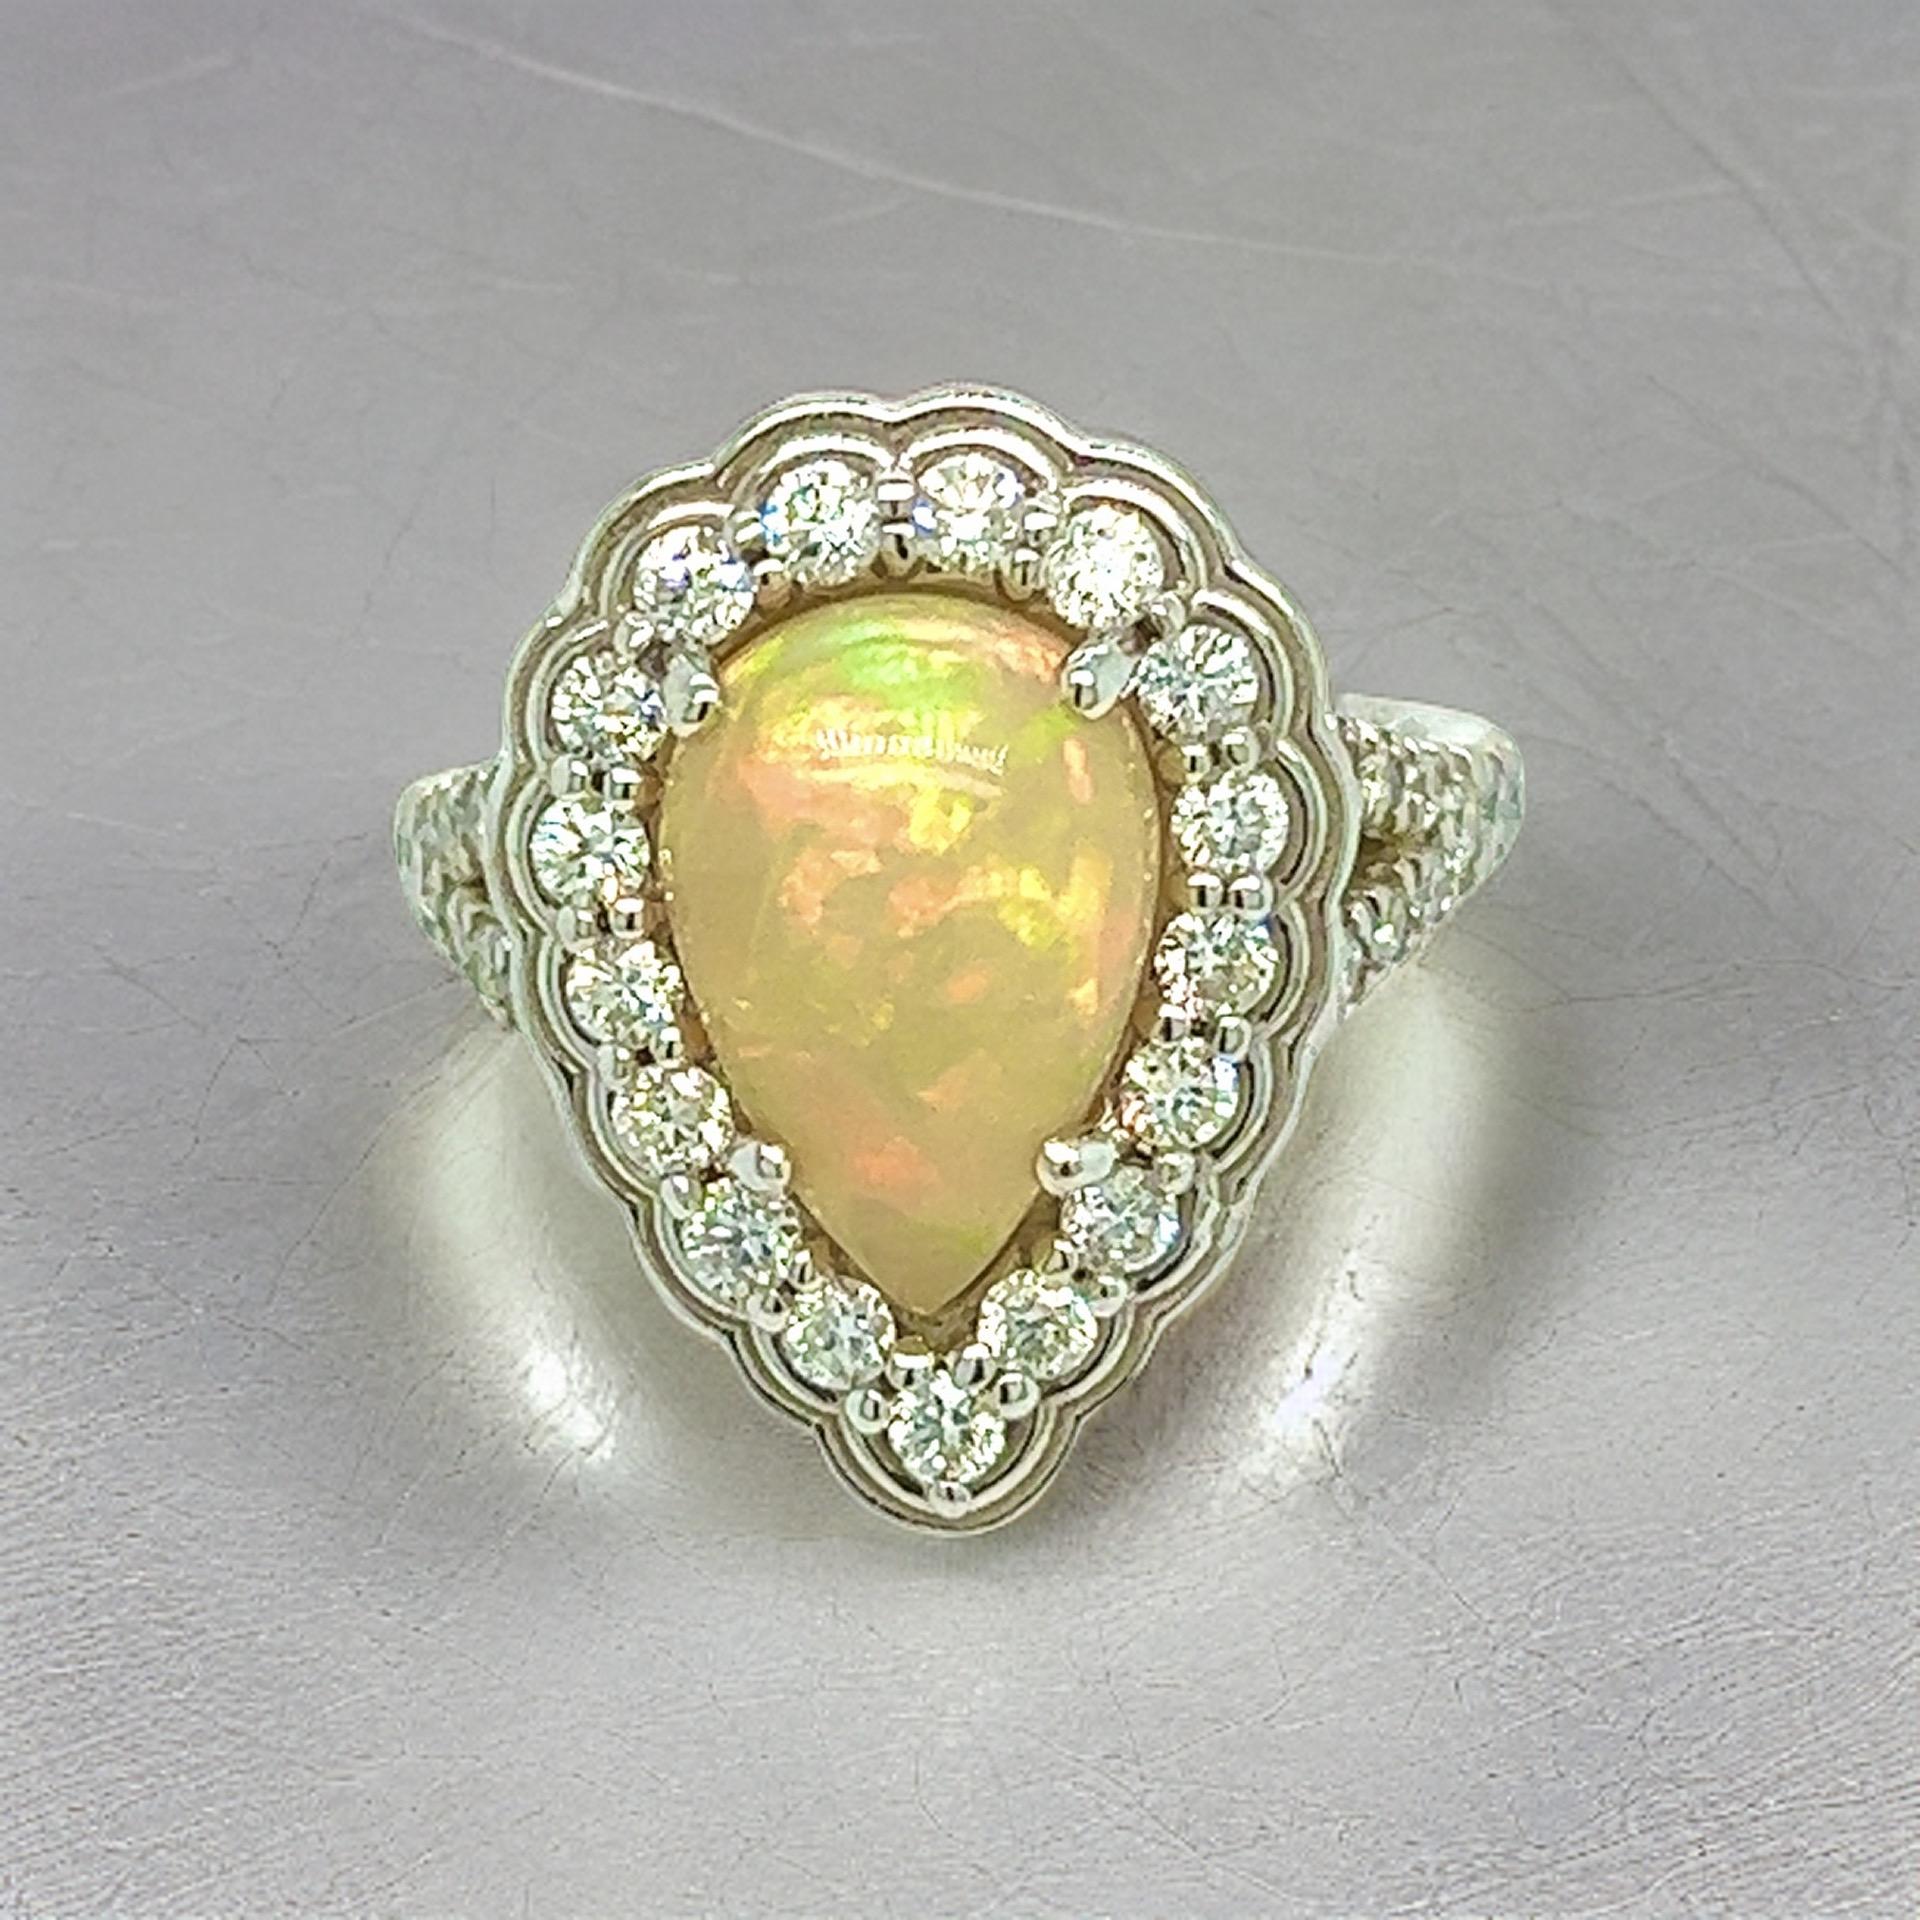 Natural Opal Diamond Ring 6.25 14k W Gold 2.35 TCW Certified For Sale 5